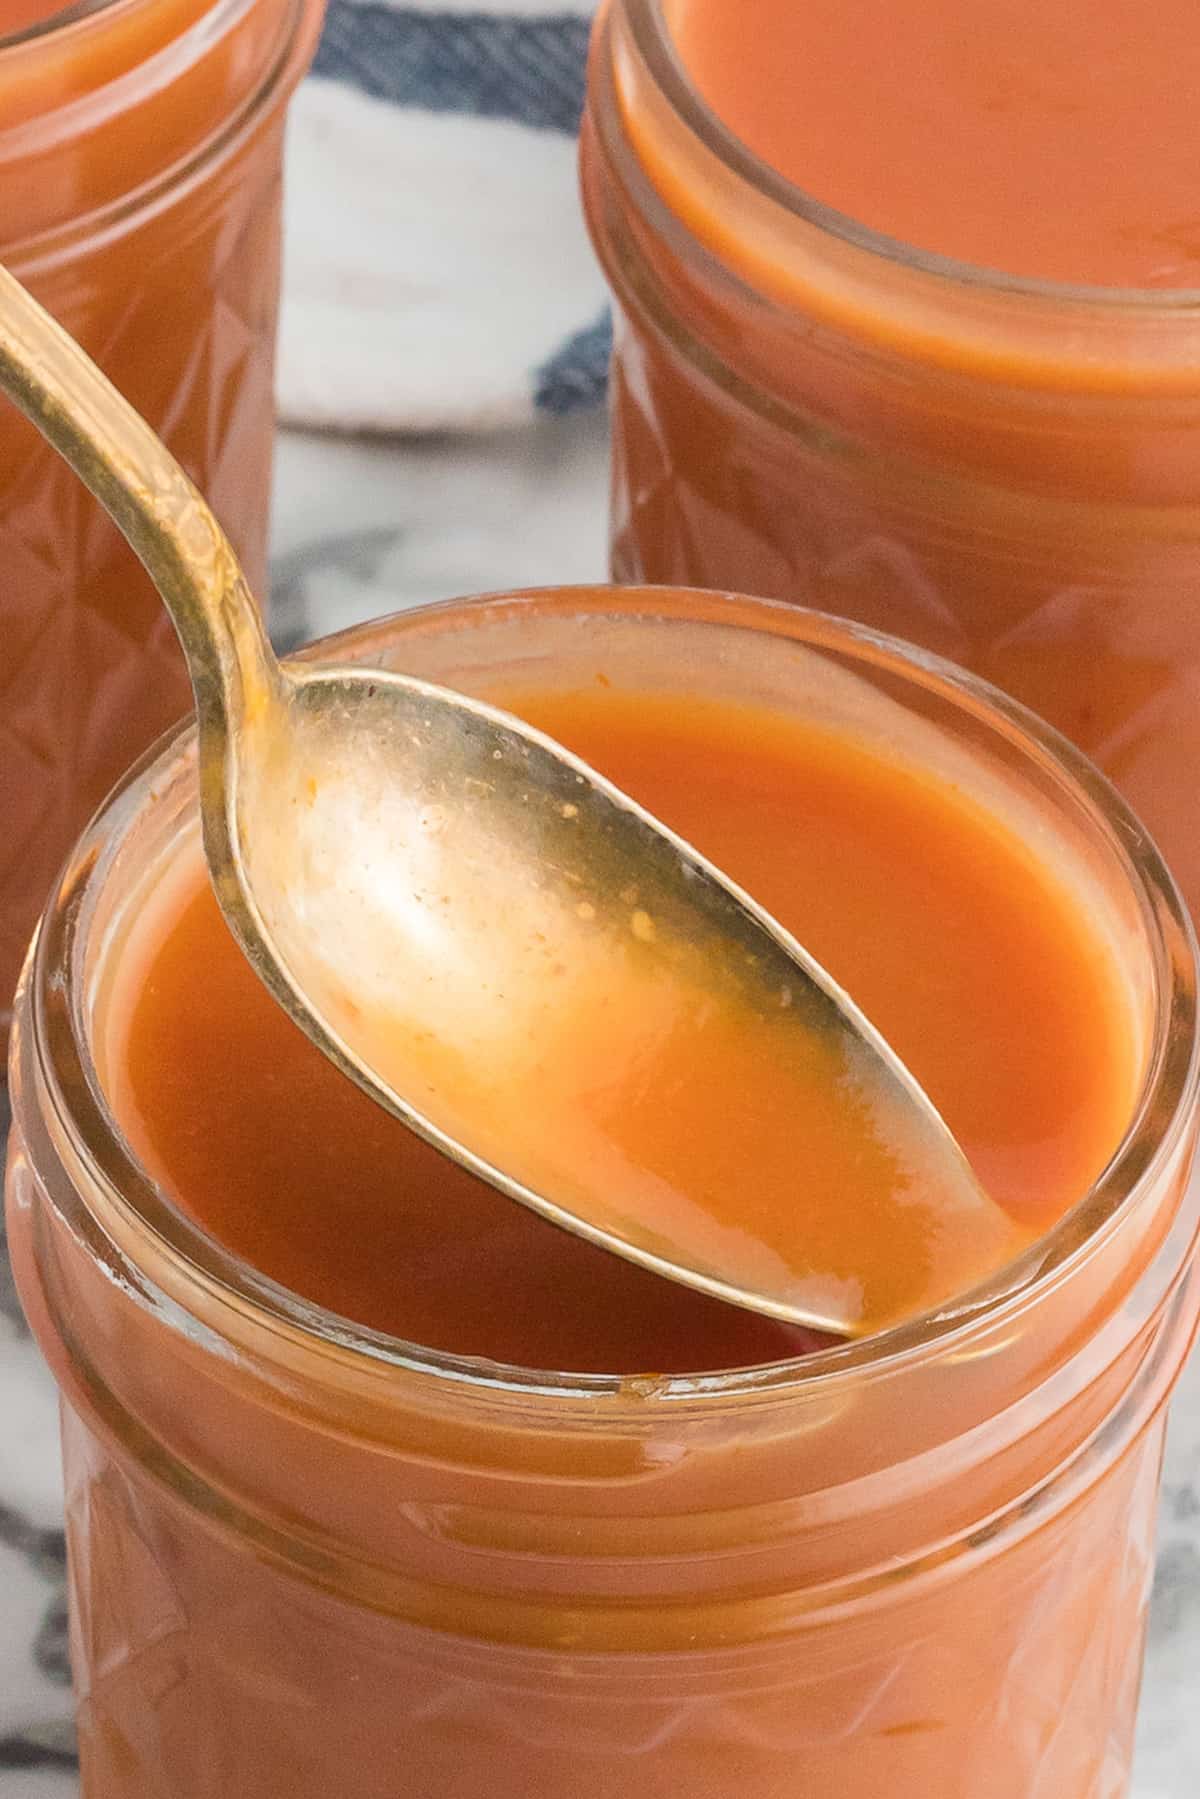 Finished sauce in a small jar with a spoon.